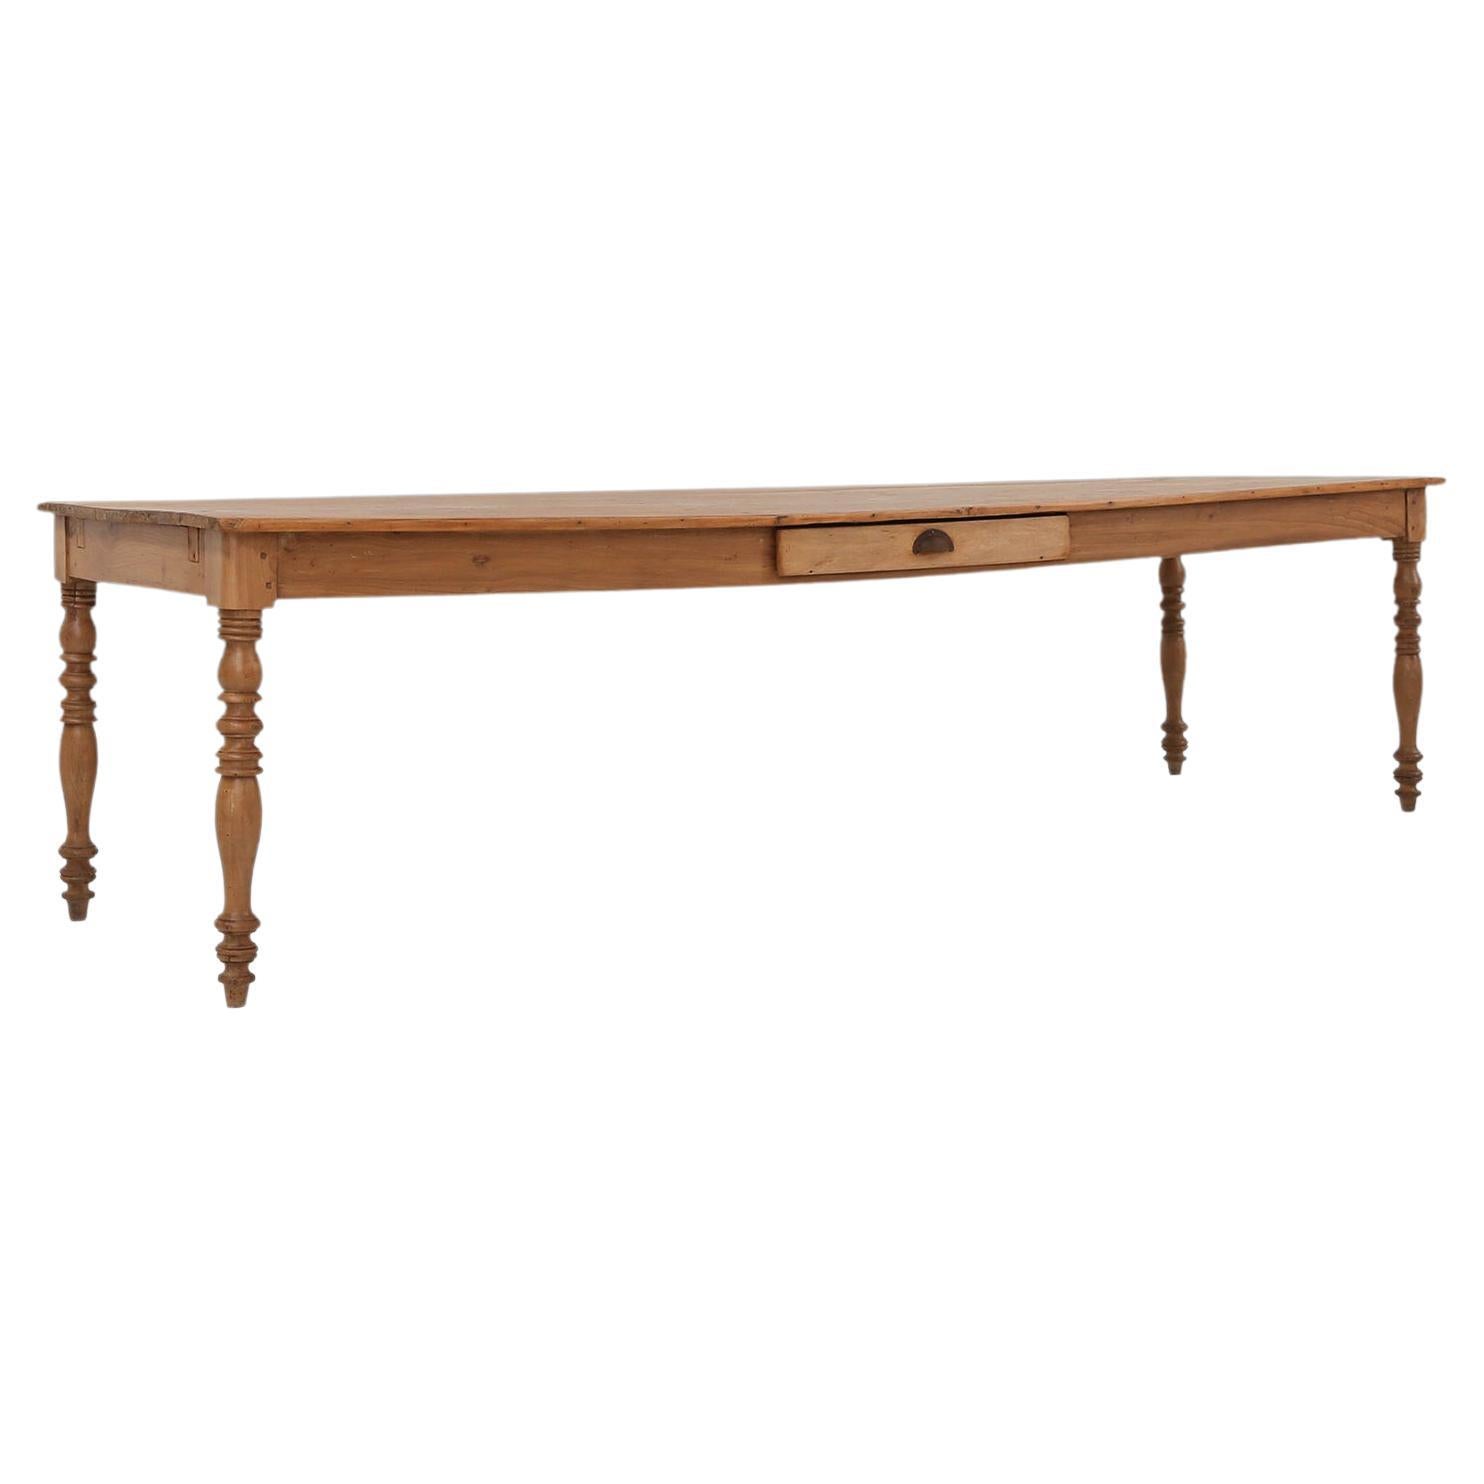 Large pine wood farm table with drawer and turned legs, France, 1850s For Sale